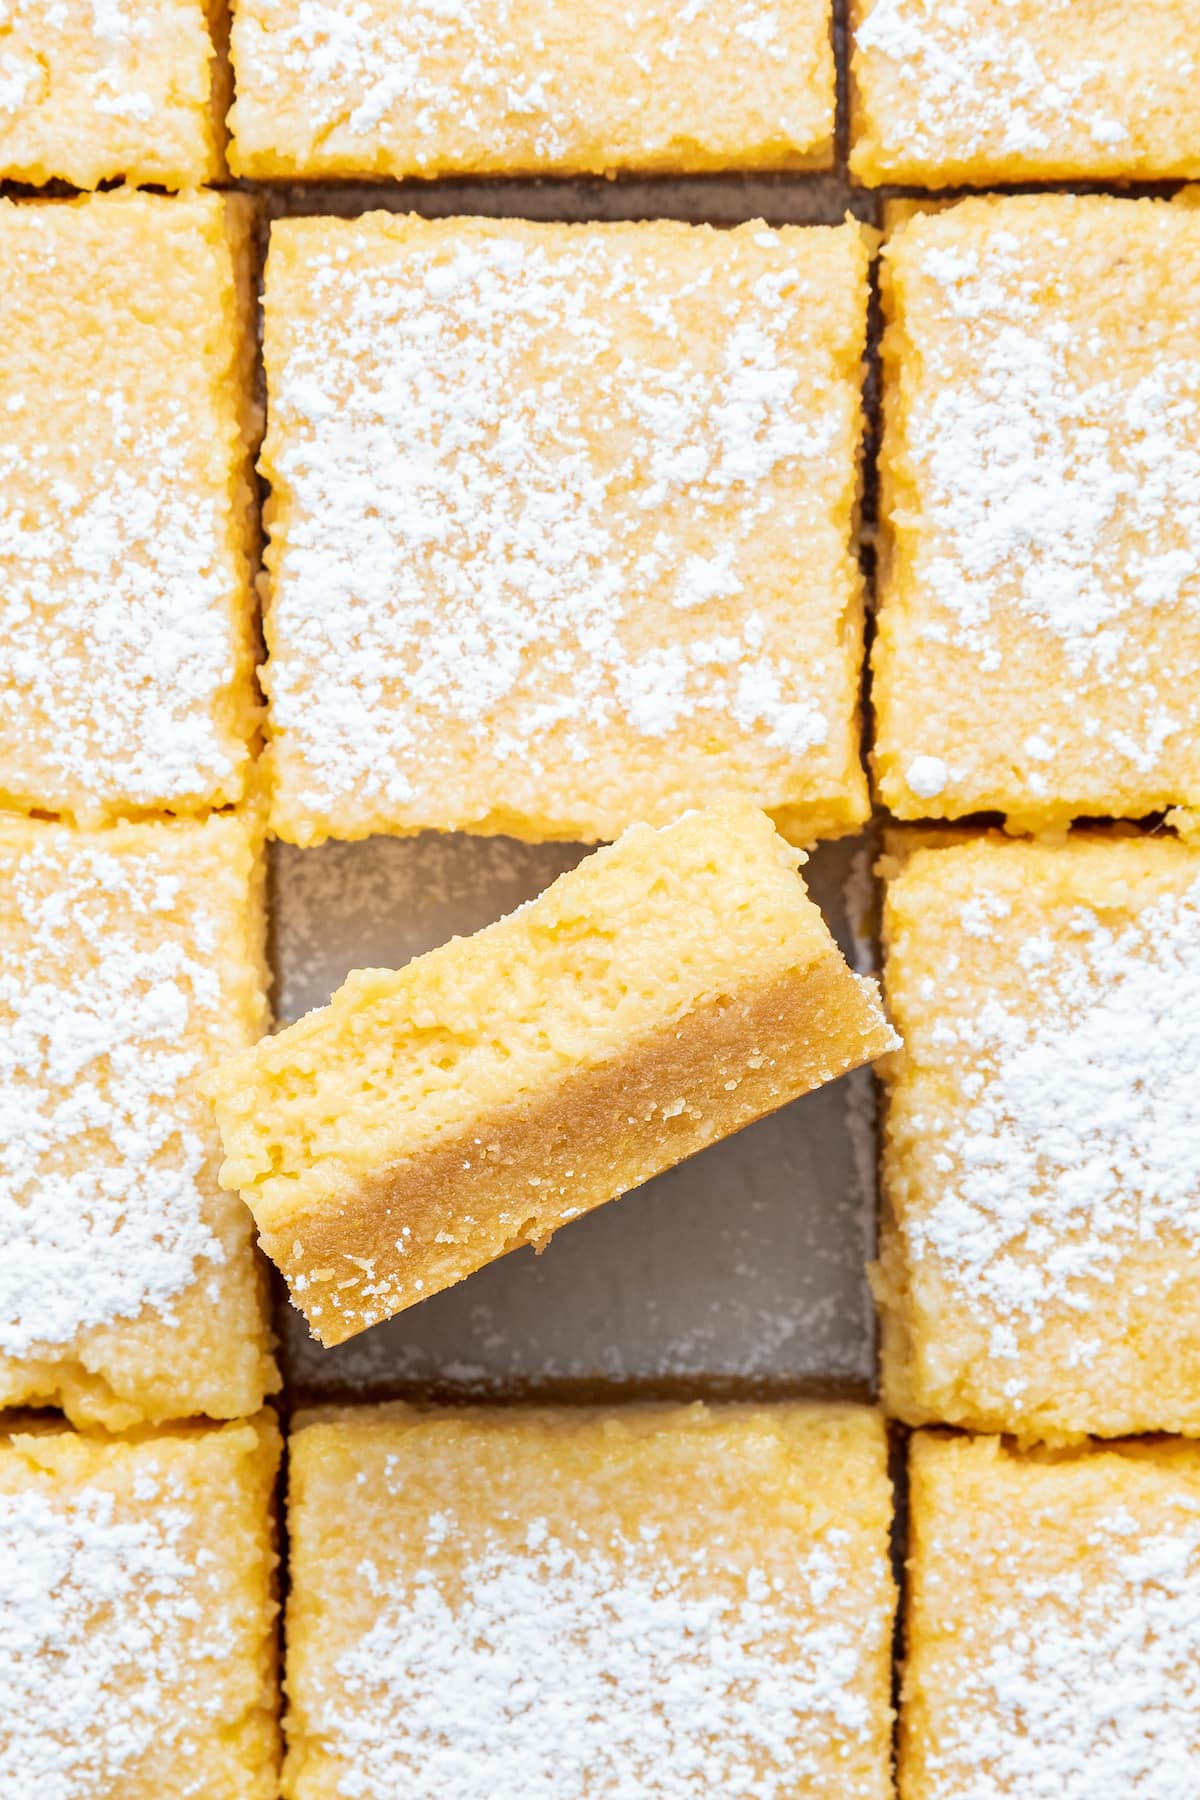 Close up photo of lemon bars in a row with one bar on its side.